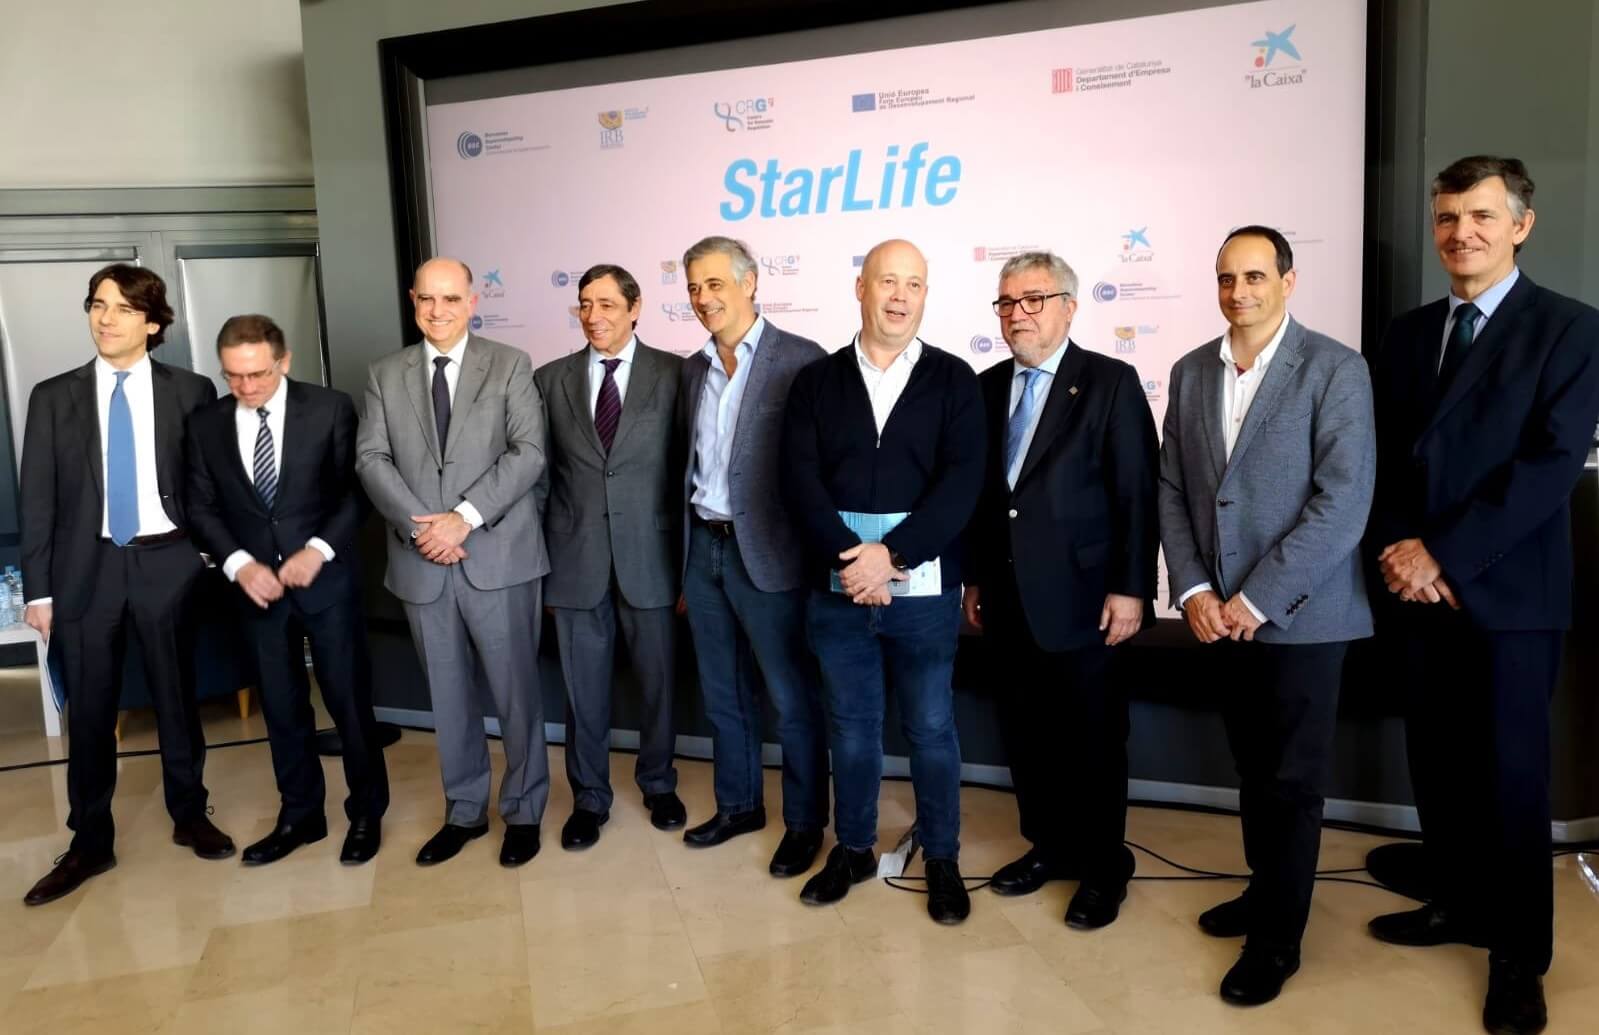 Launch of “StarLife”, a new informatics infrastructure to boost biomedical research